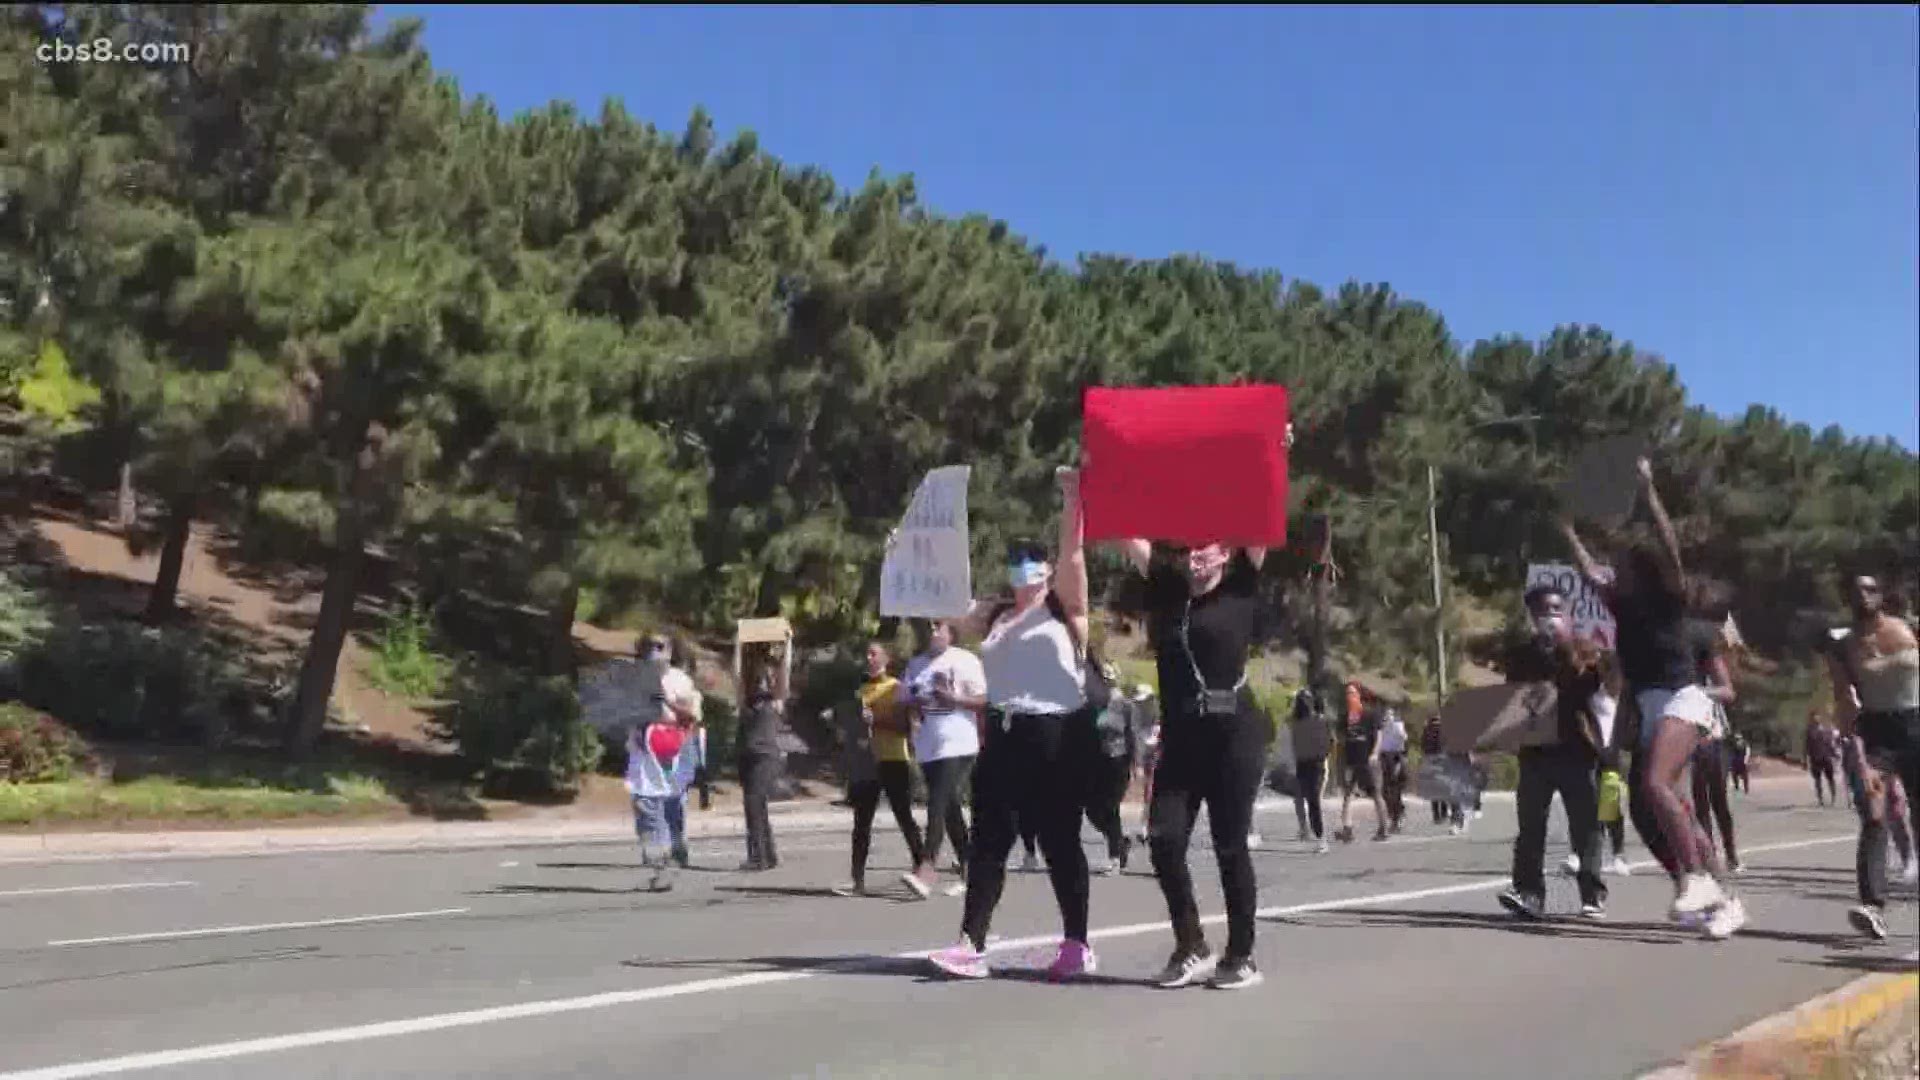 Hundreds of marchers were seen making their way through the streets of Eastlake.